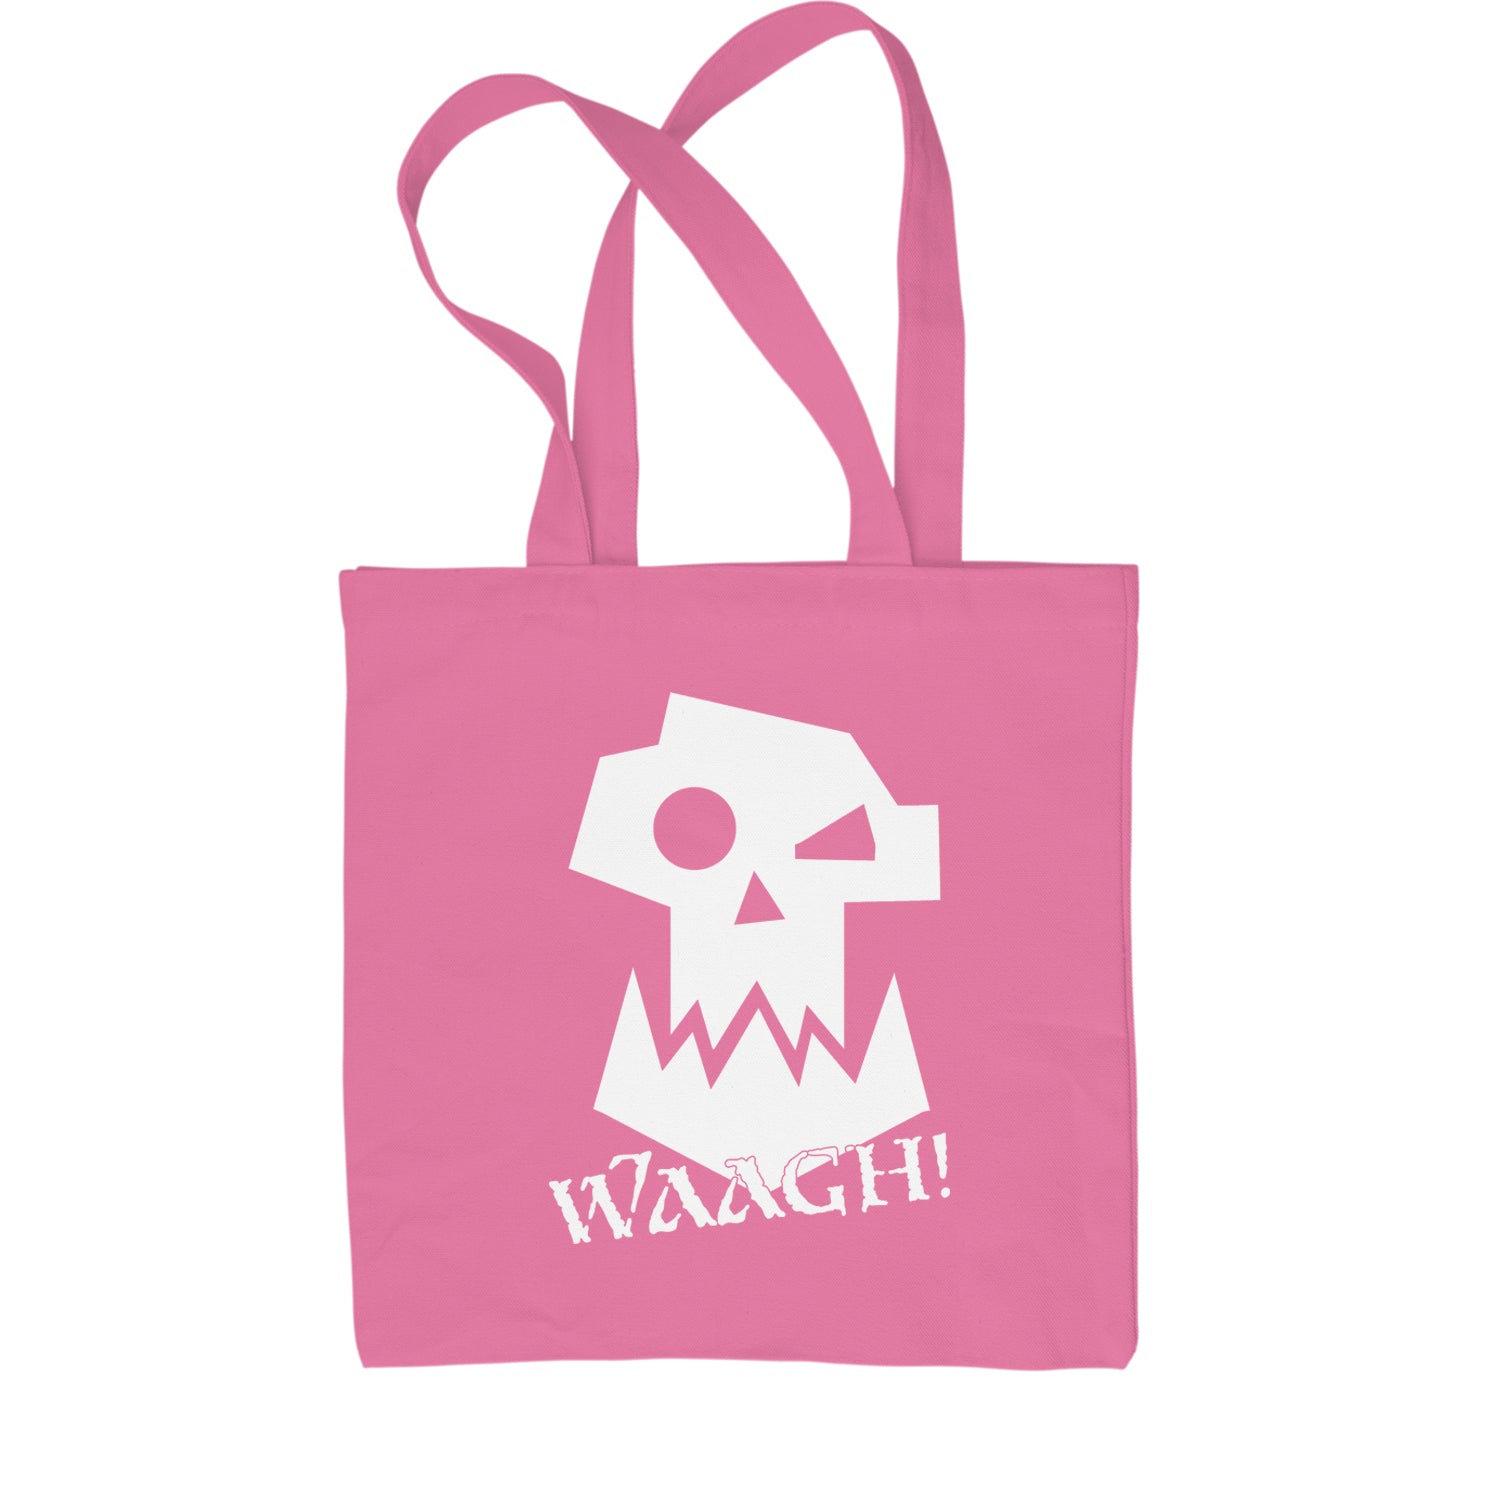 Ork Miniature Tabletop Wargaming Waagh Shopping Tote Bag #expressiontees by Expression Tees